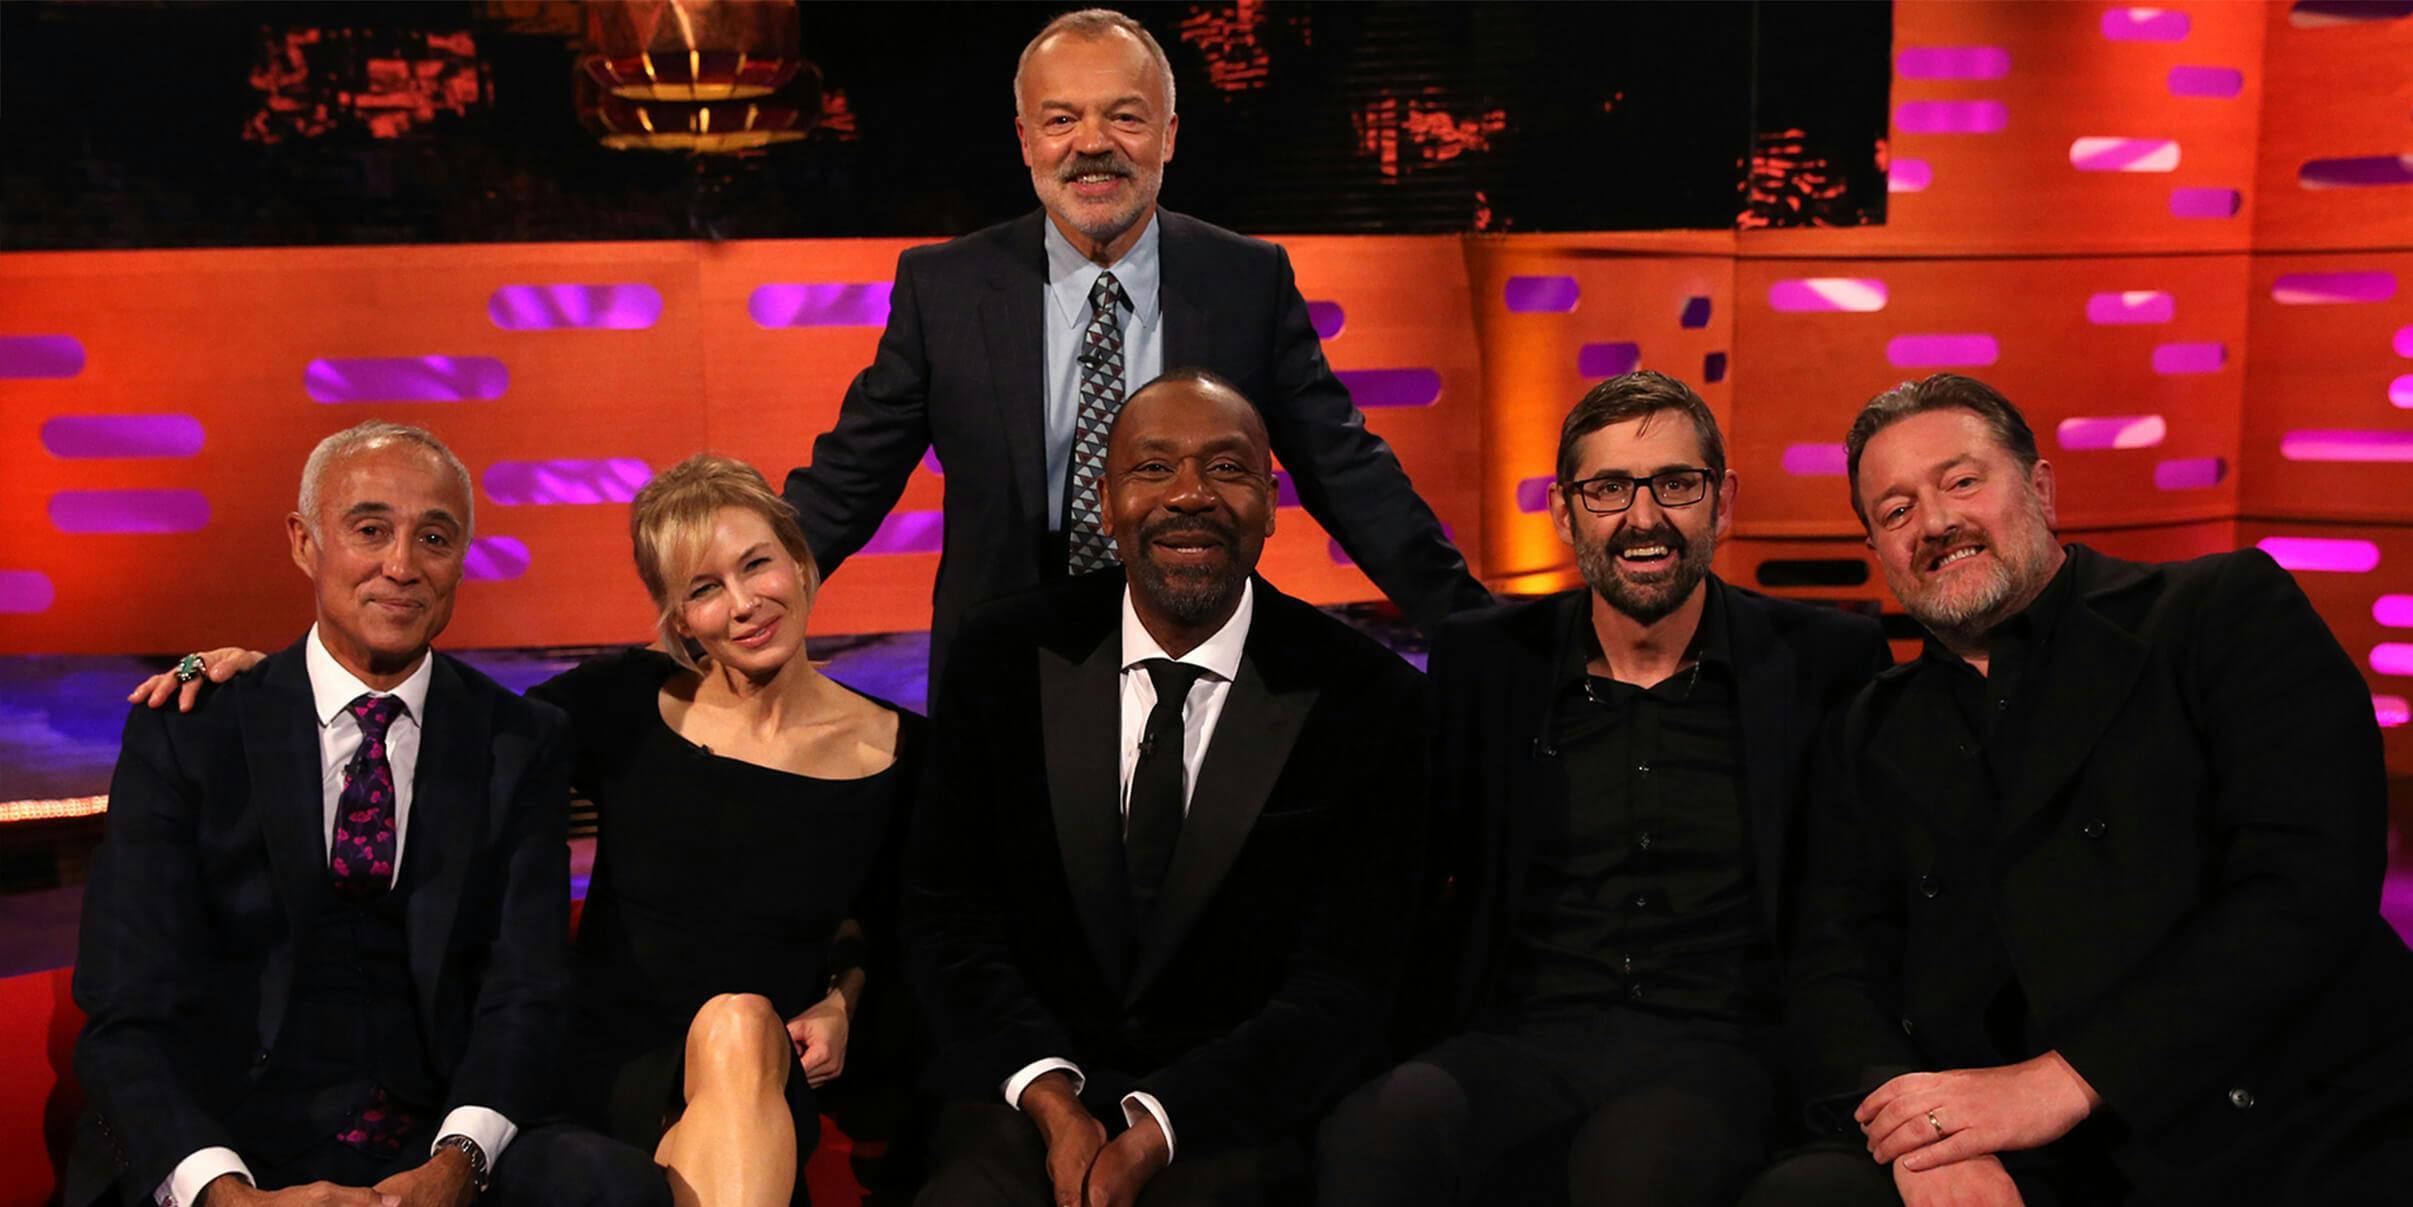 Stream 'The Graham Norton Show' How to Watch Online